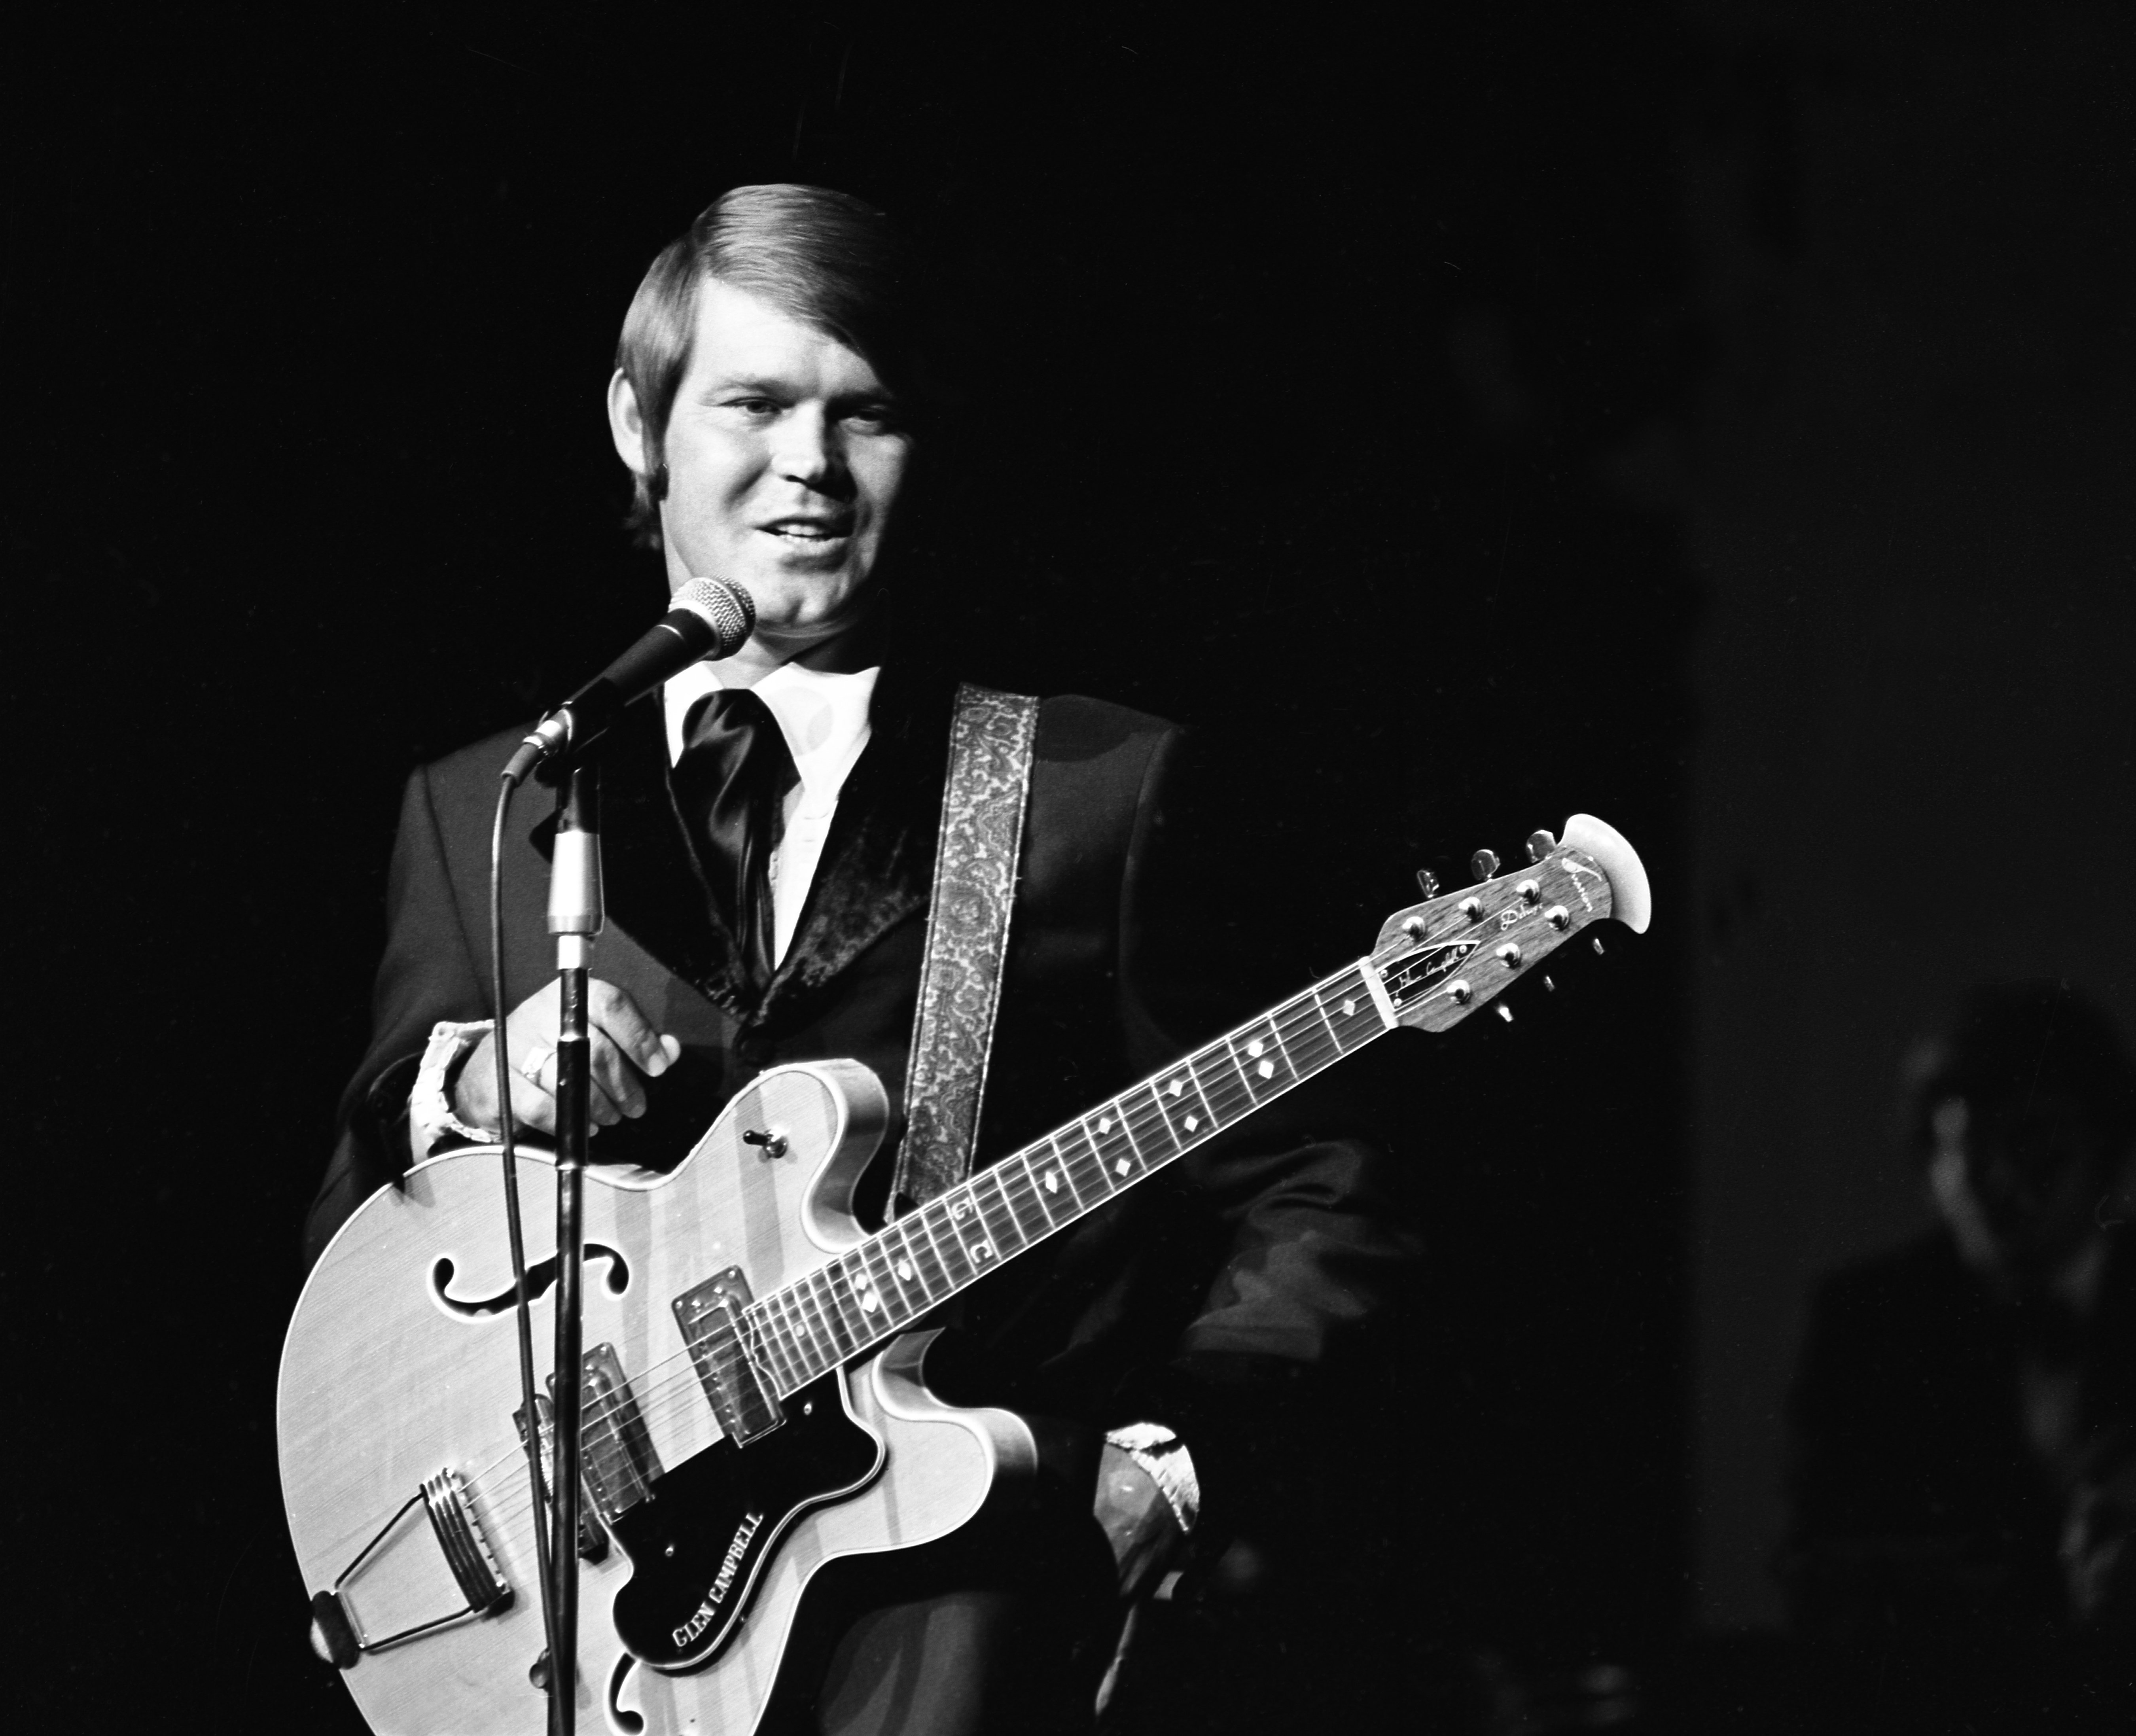 Glen Campbell onstage at the International Hotel in Las Vegas on July 13, 1970.